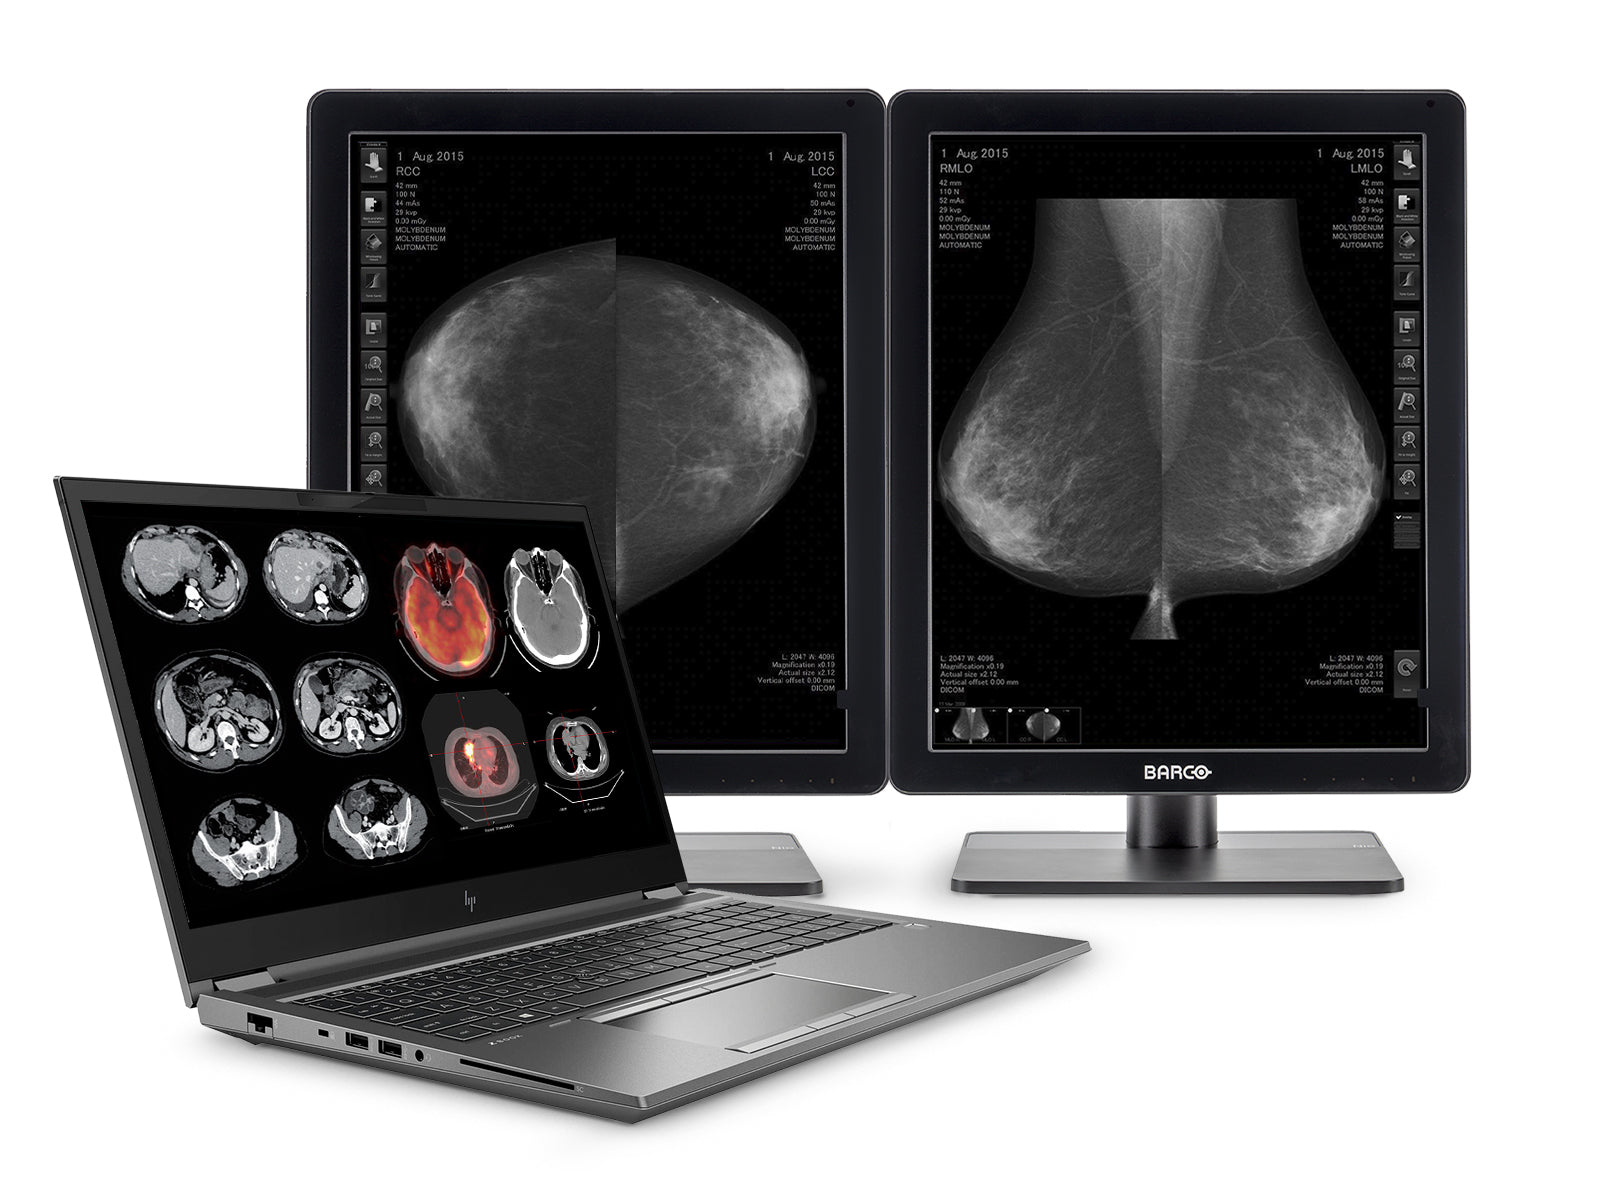 HP ZBook 15 G7 Mobile Radiology Workstation | 15.6" Full HD LED | Core i9-10885H @ 5.30GHz | 8-Core | 32GB DDR4 | 512GB NVMe SSD | Quadro RTX 3000 6GB | Win10 Pro Monitors.com 